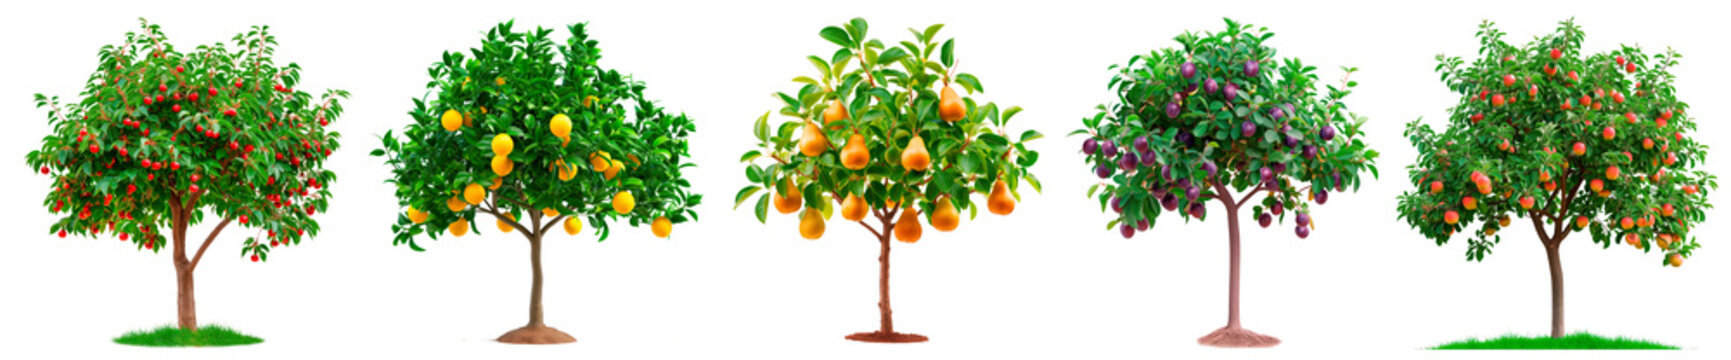 A big bundle of different trees isolated on a white or transparent background. A close-up of a trees with fruits. A graphic design element on the theme of nature and tree care.